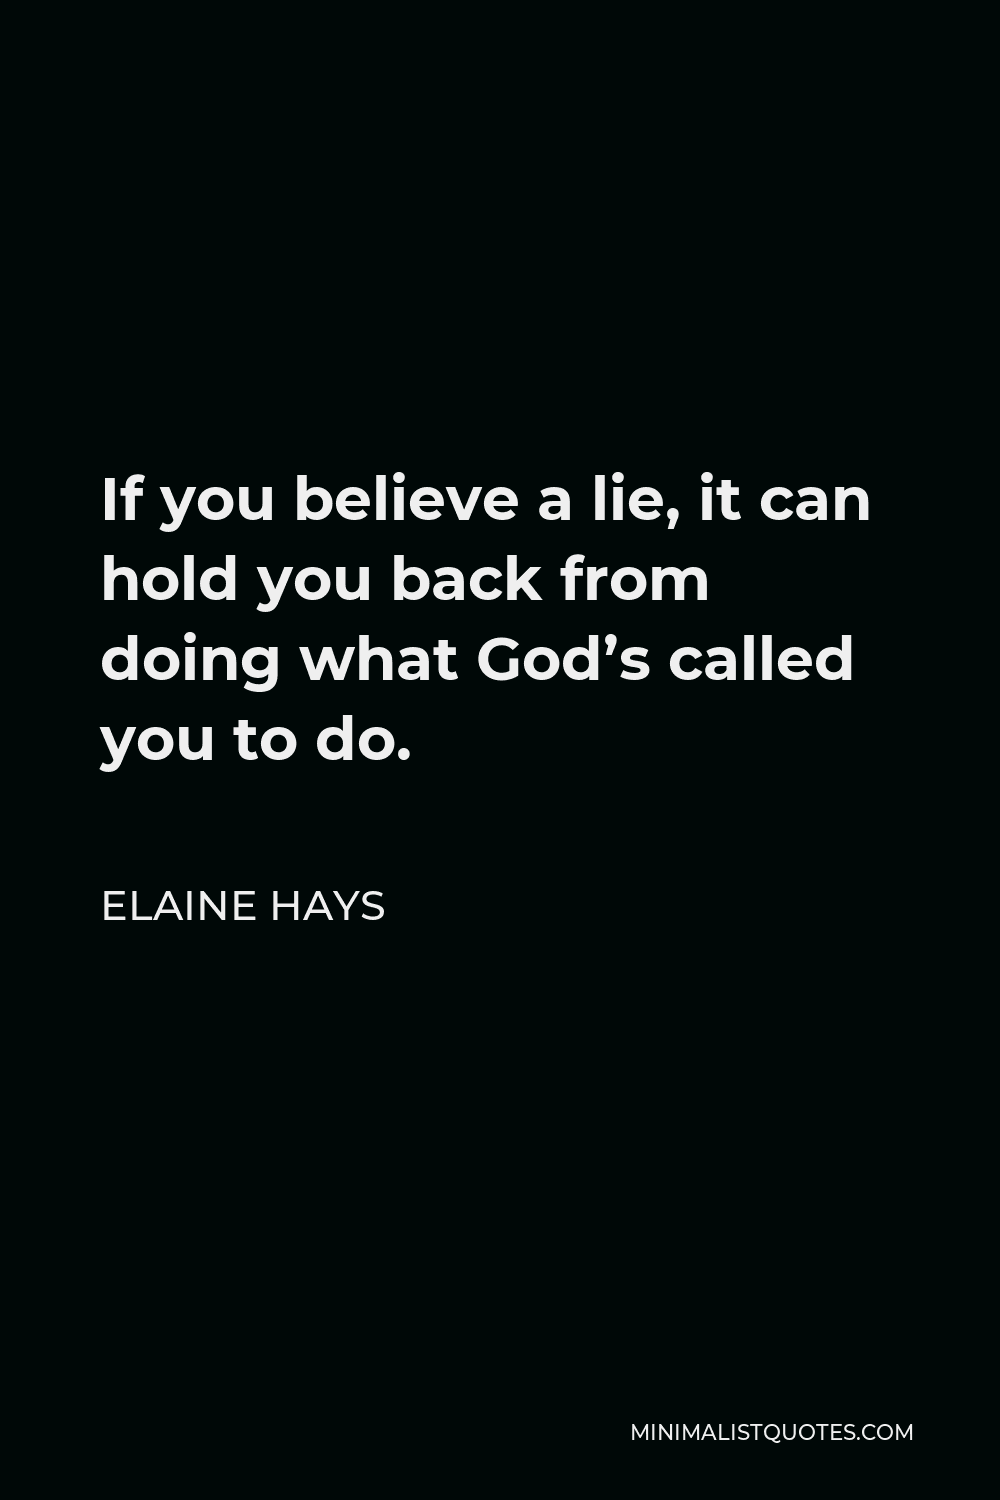 Elaine Hays Quote - If you believe a lie, it can hold you back from doing what God’s called you to do.